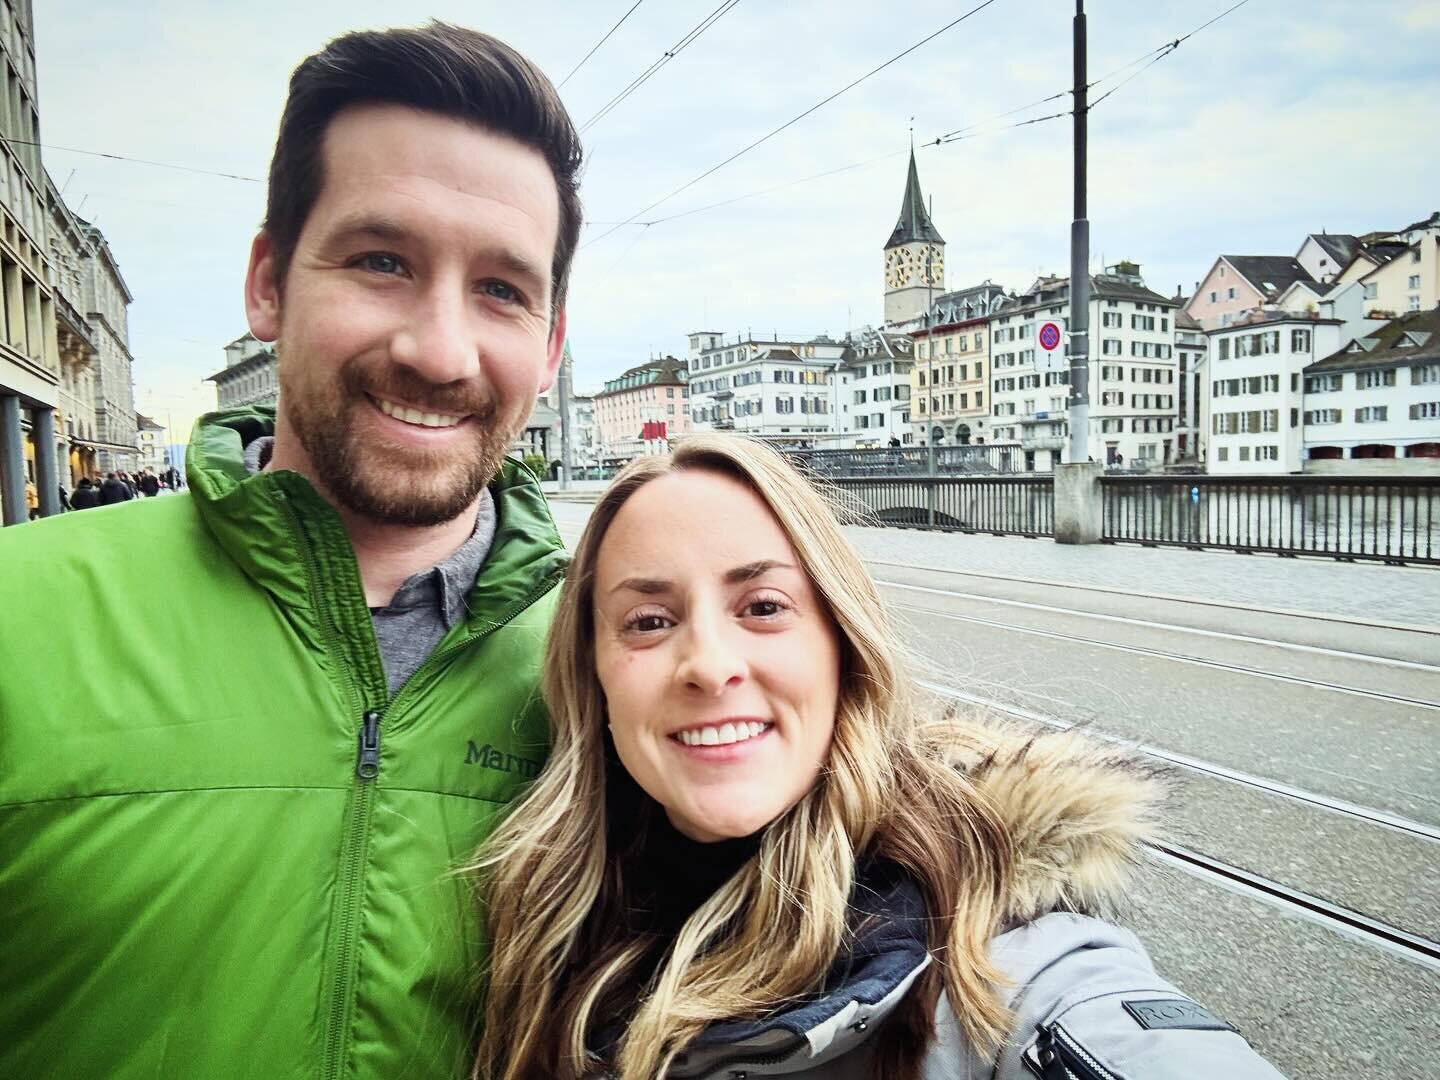 Our last stop on our trip! And one of my favorites ✨ Zurich, Switzerland! We had the best time doing all the touristy things. We ate the best fondue 🫕, went to the Lindt Chocolate Factory and explored the beautiful city of Zurich. We ended the trip 